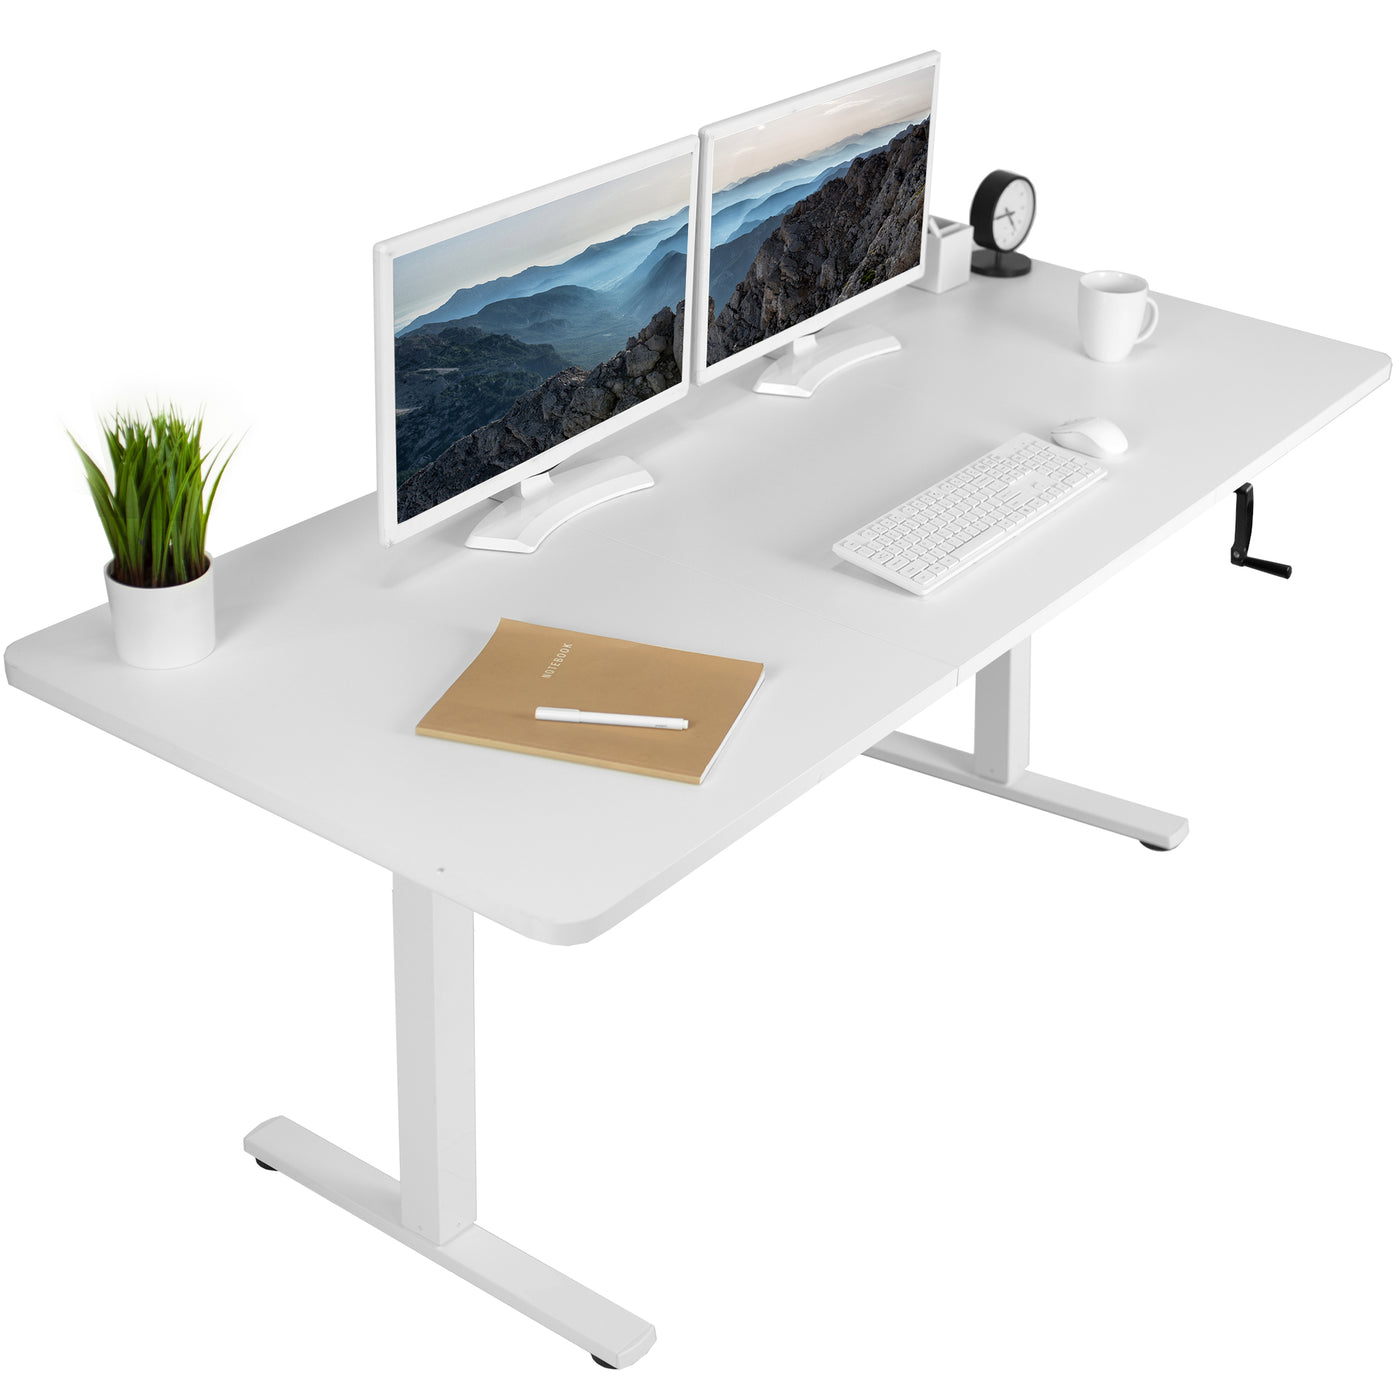 Wide surface sturdy sit or stand active workstation with adjustable height using manual hand crank.